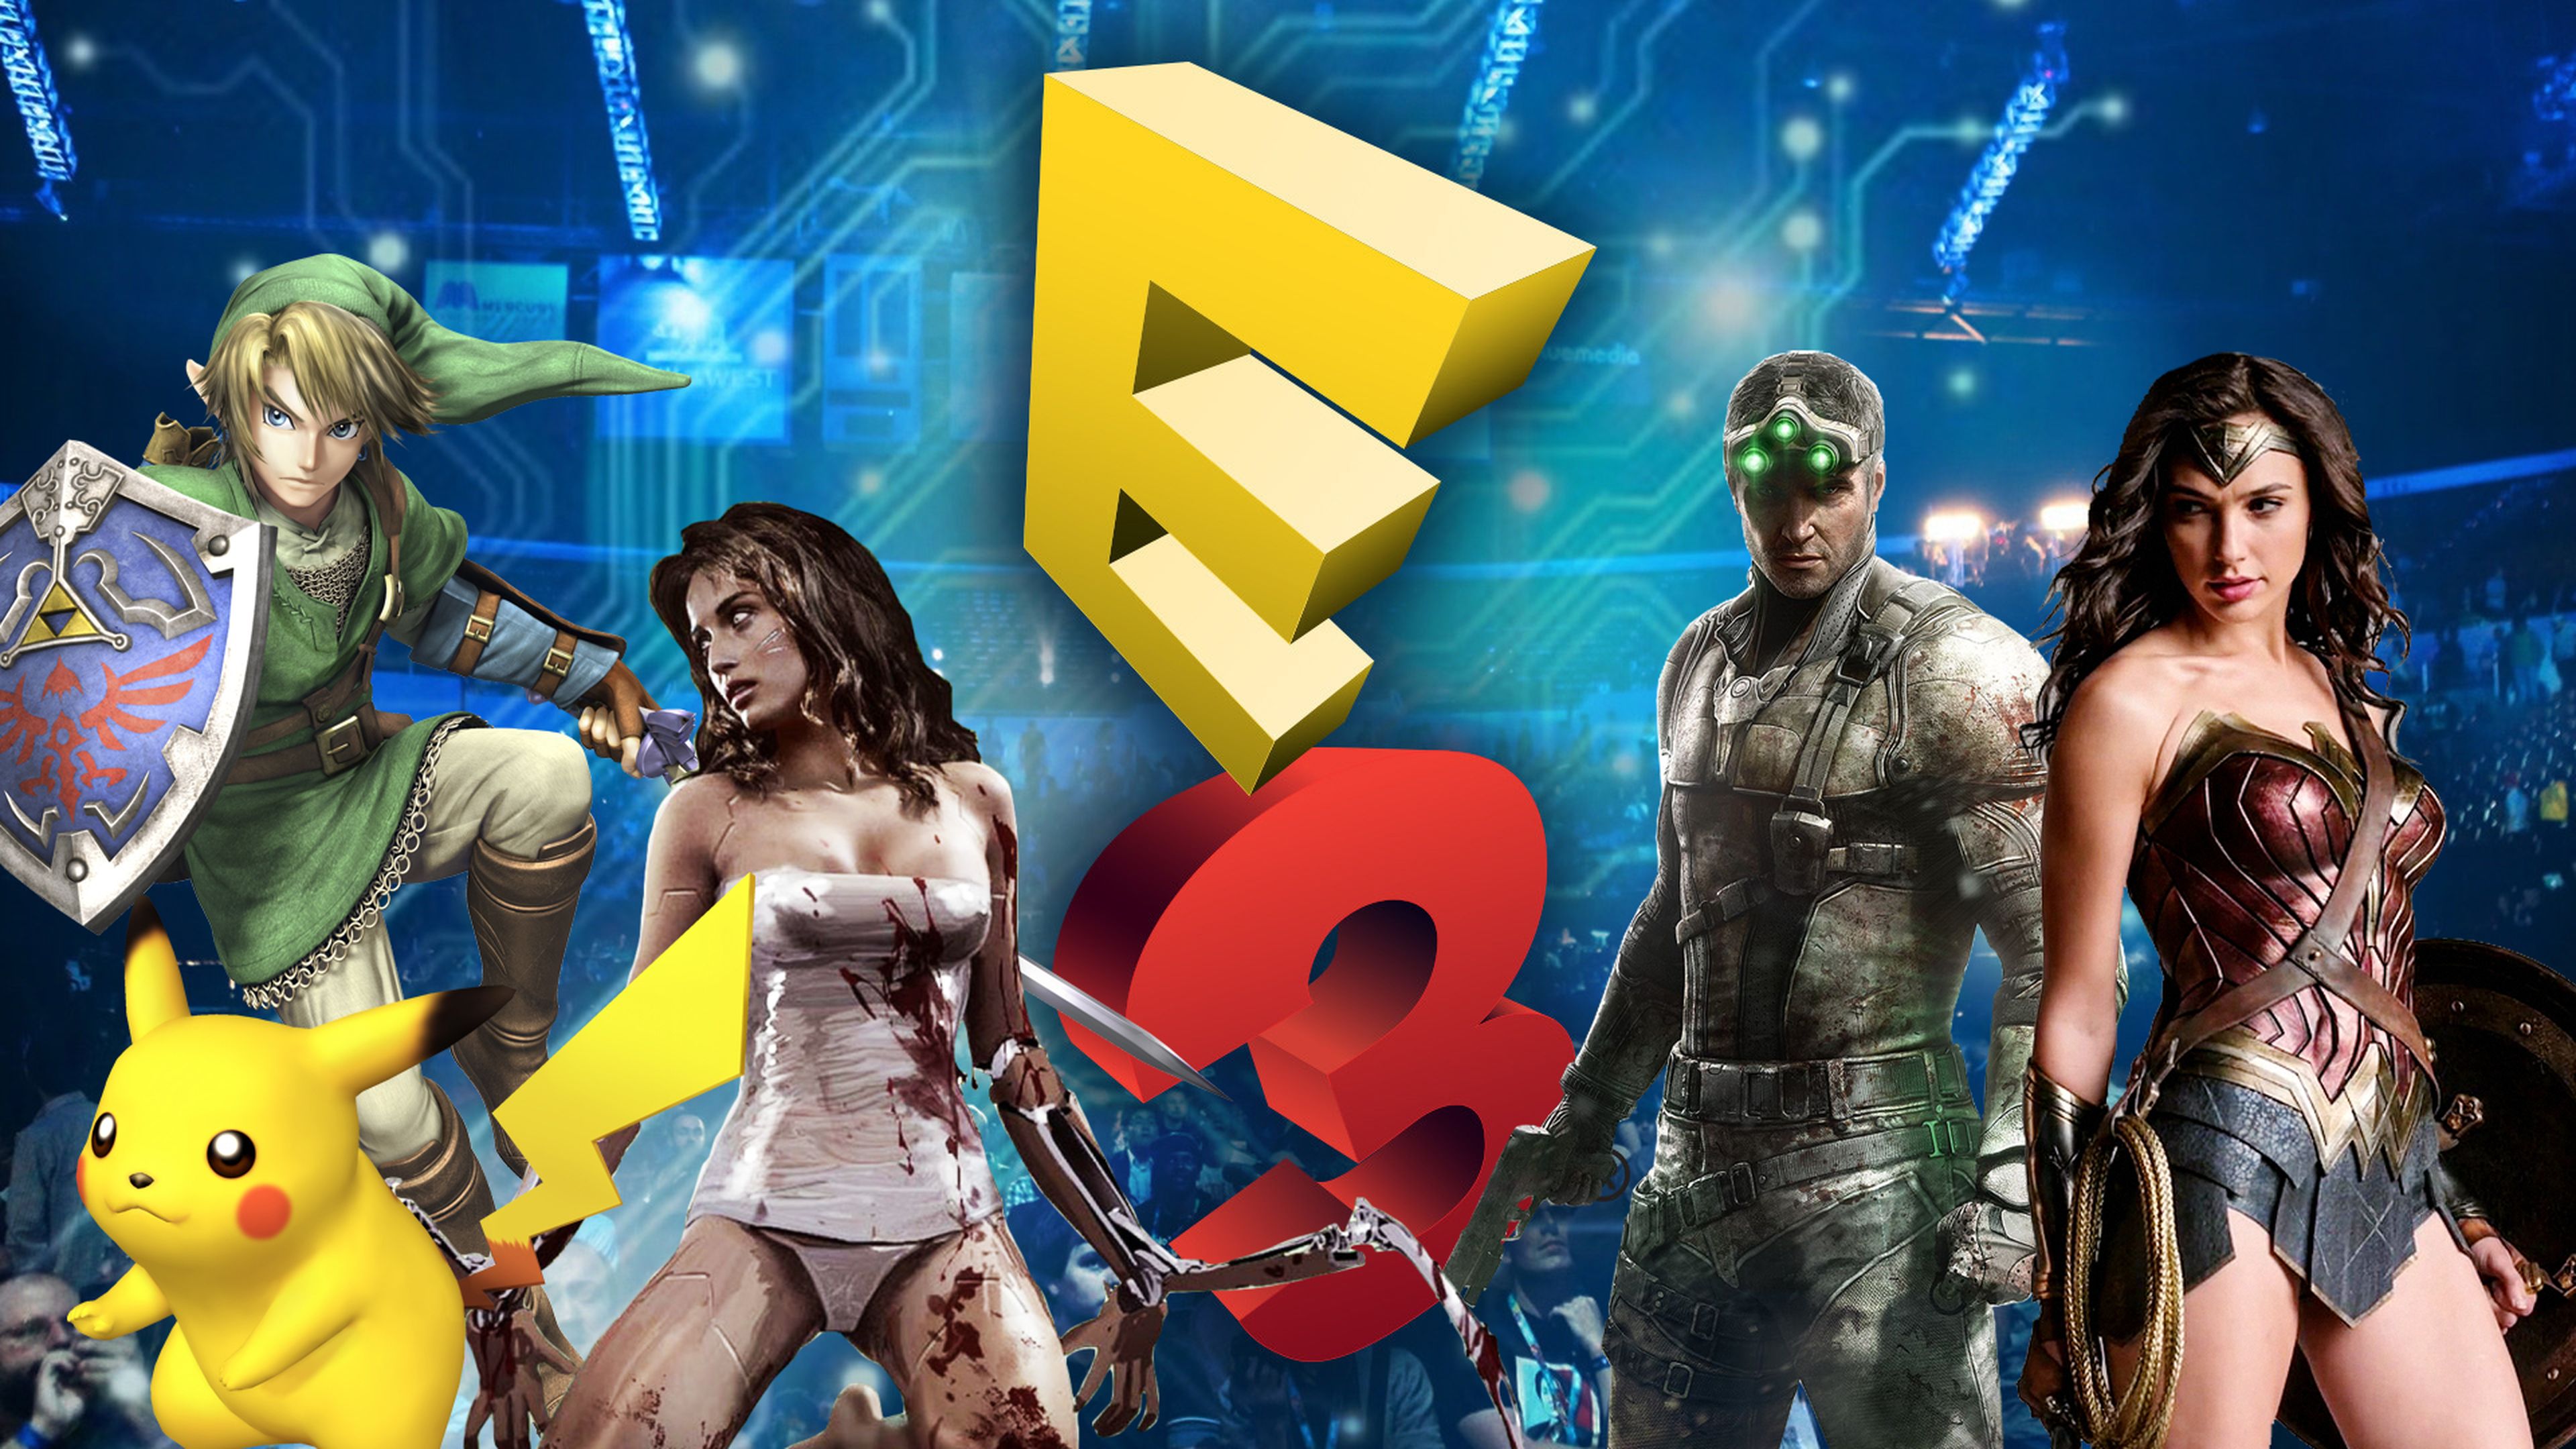 52 games that we will see at E3 2018